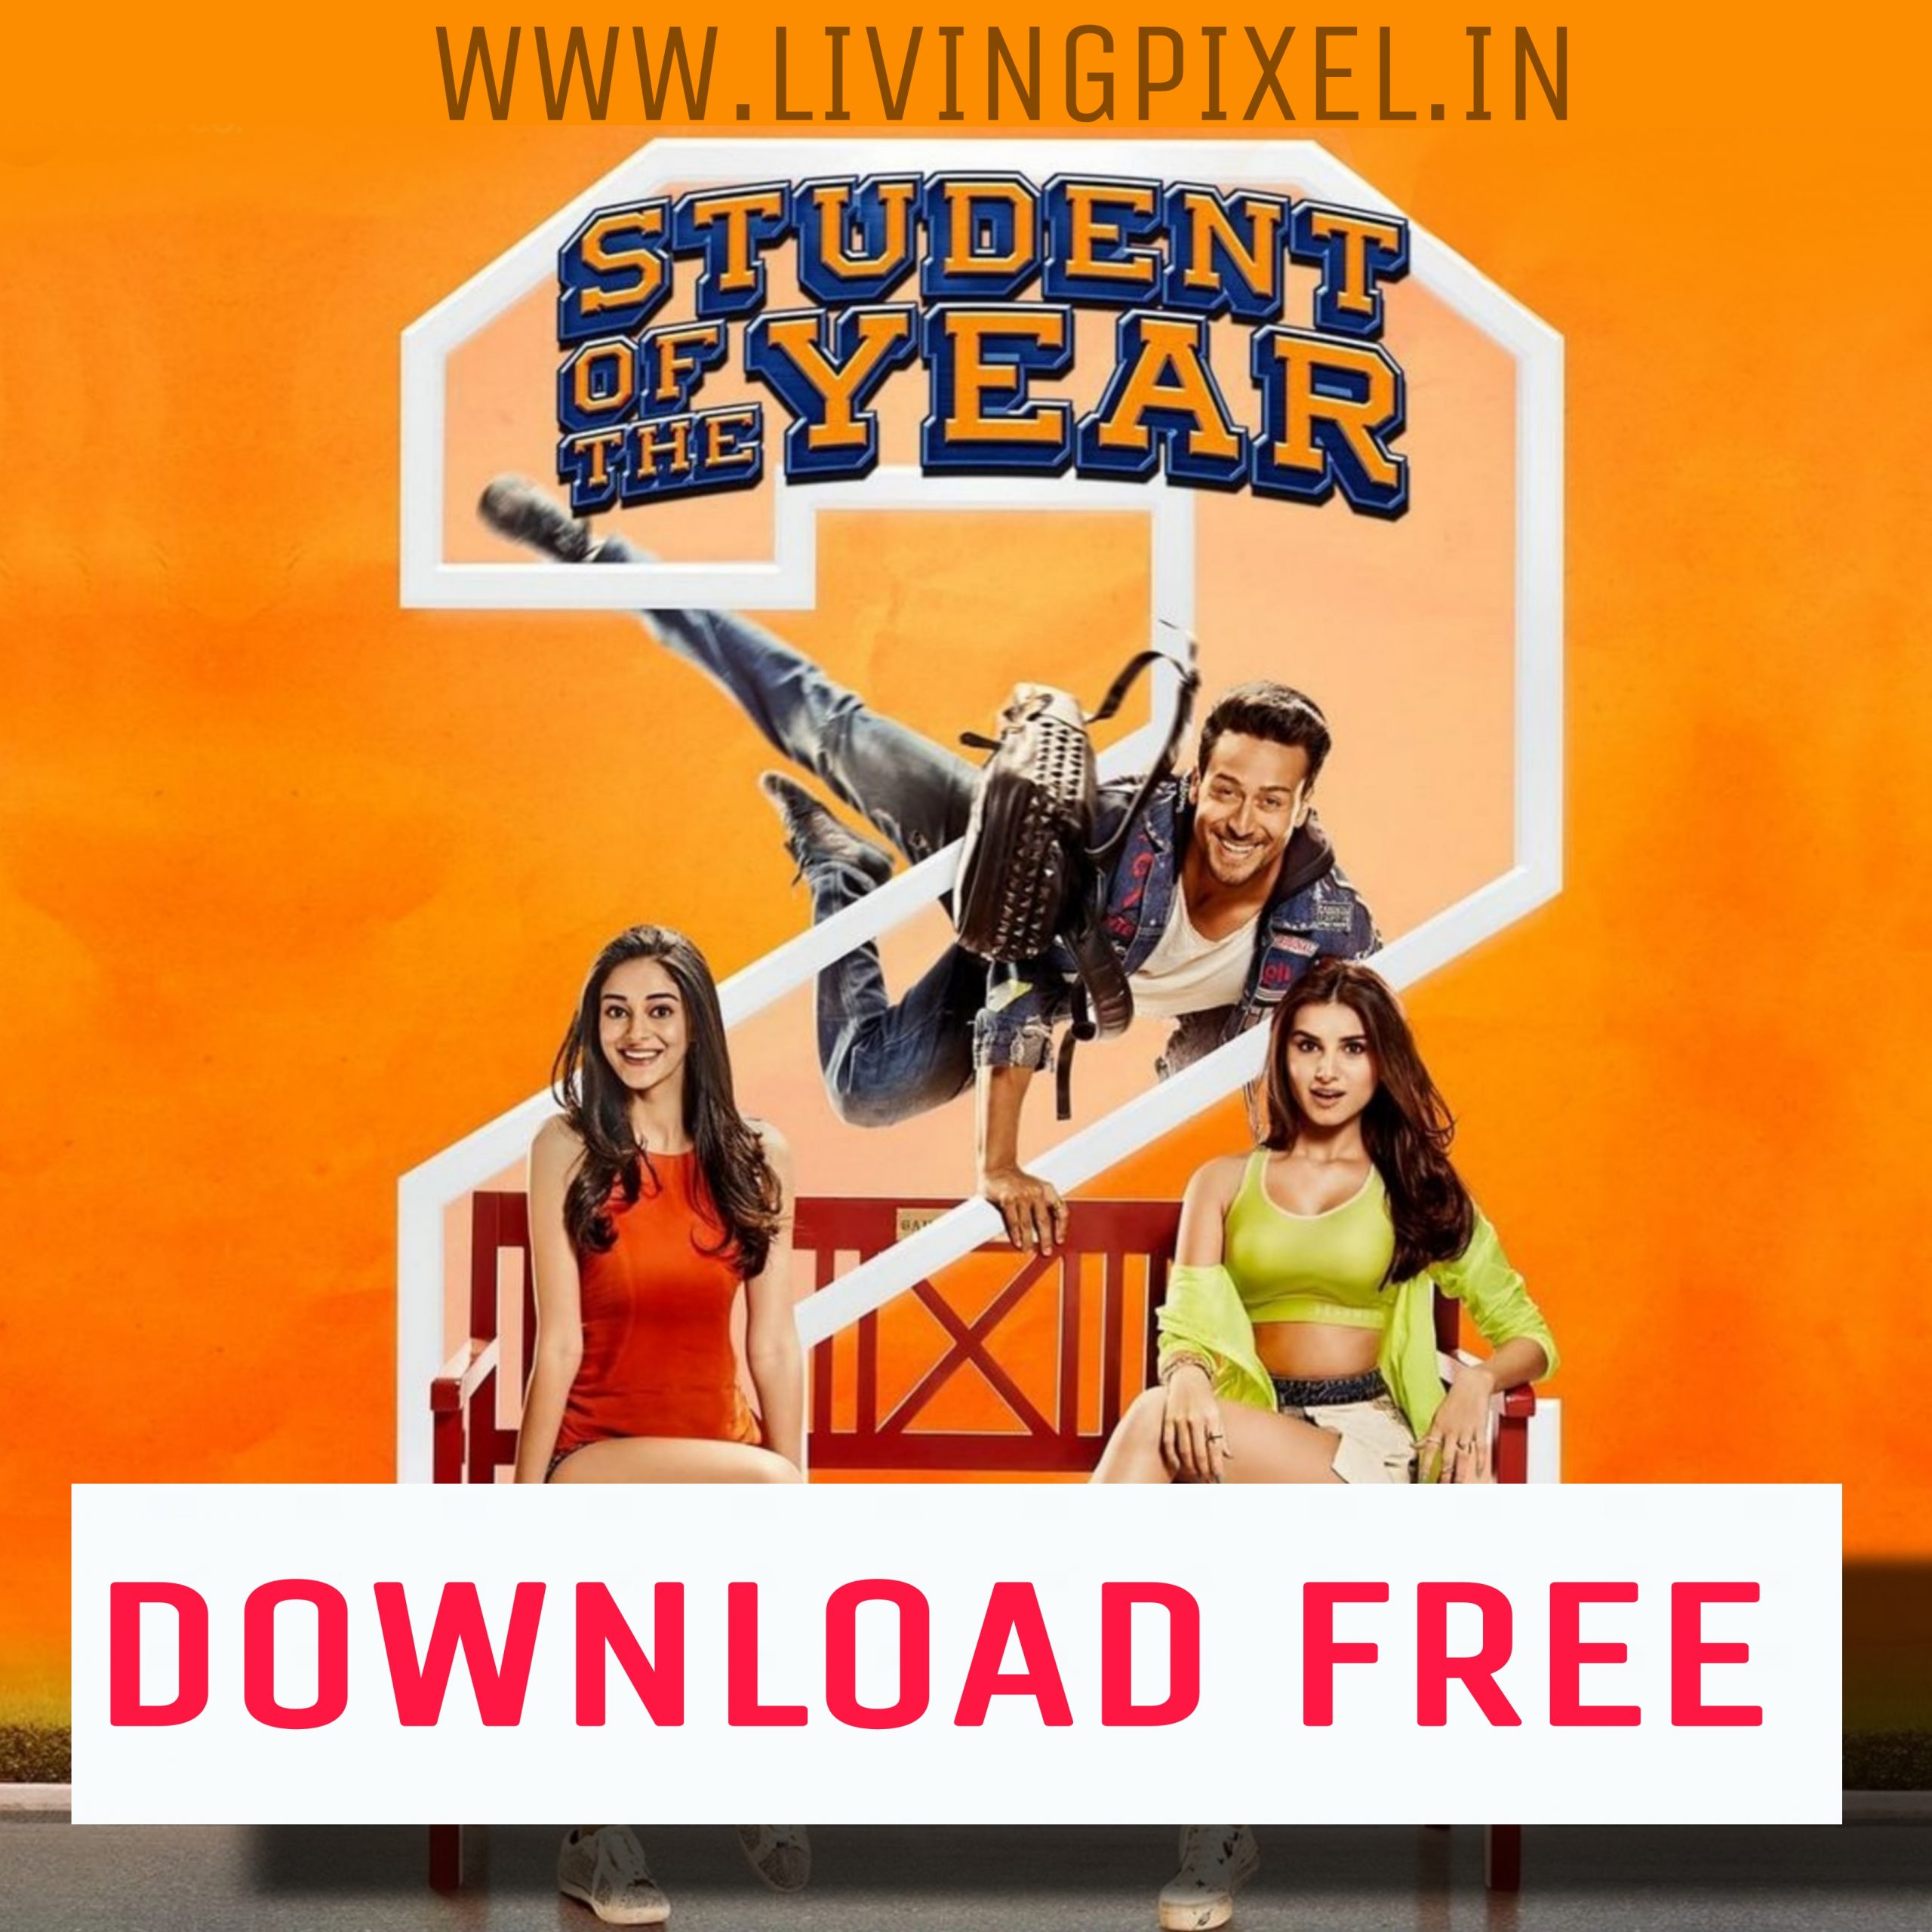 Student of the year 2 full movie download telegram | Student of the year 2 full movie download with english subtitles in HD (Direct Download Link)